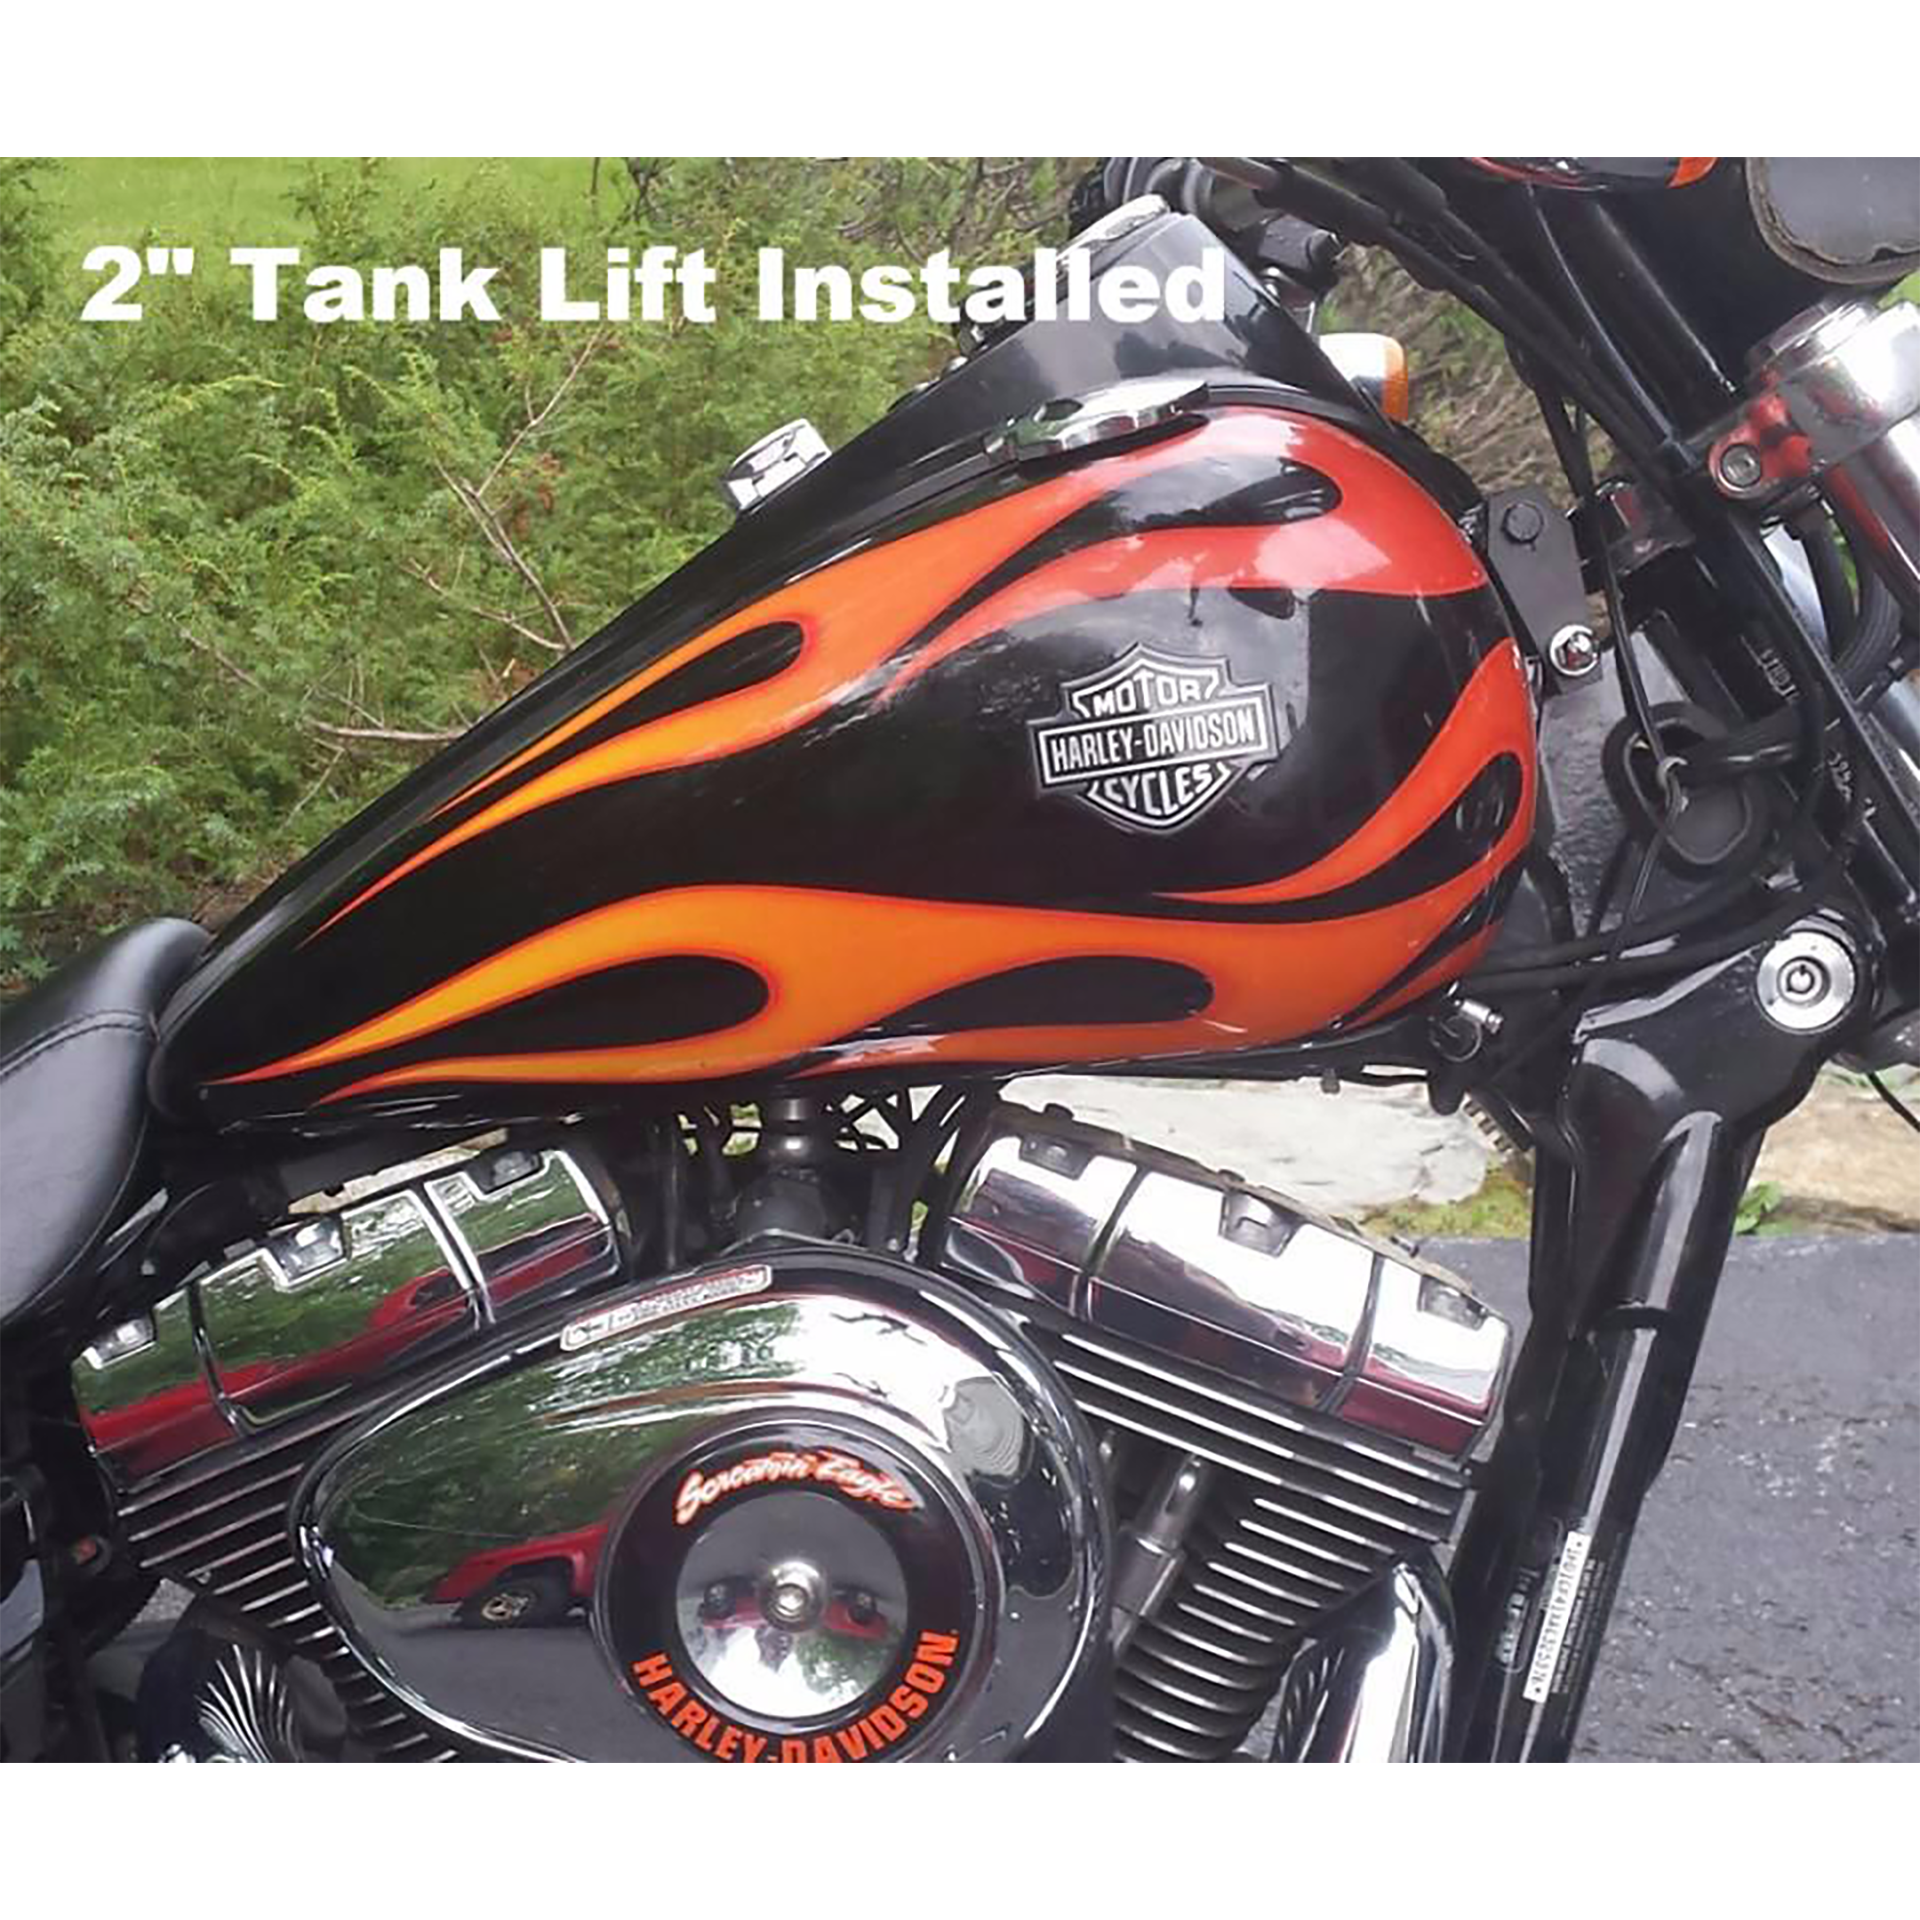 Gas Tank Lift Kit for Dyna Models